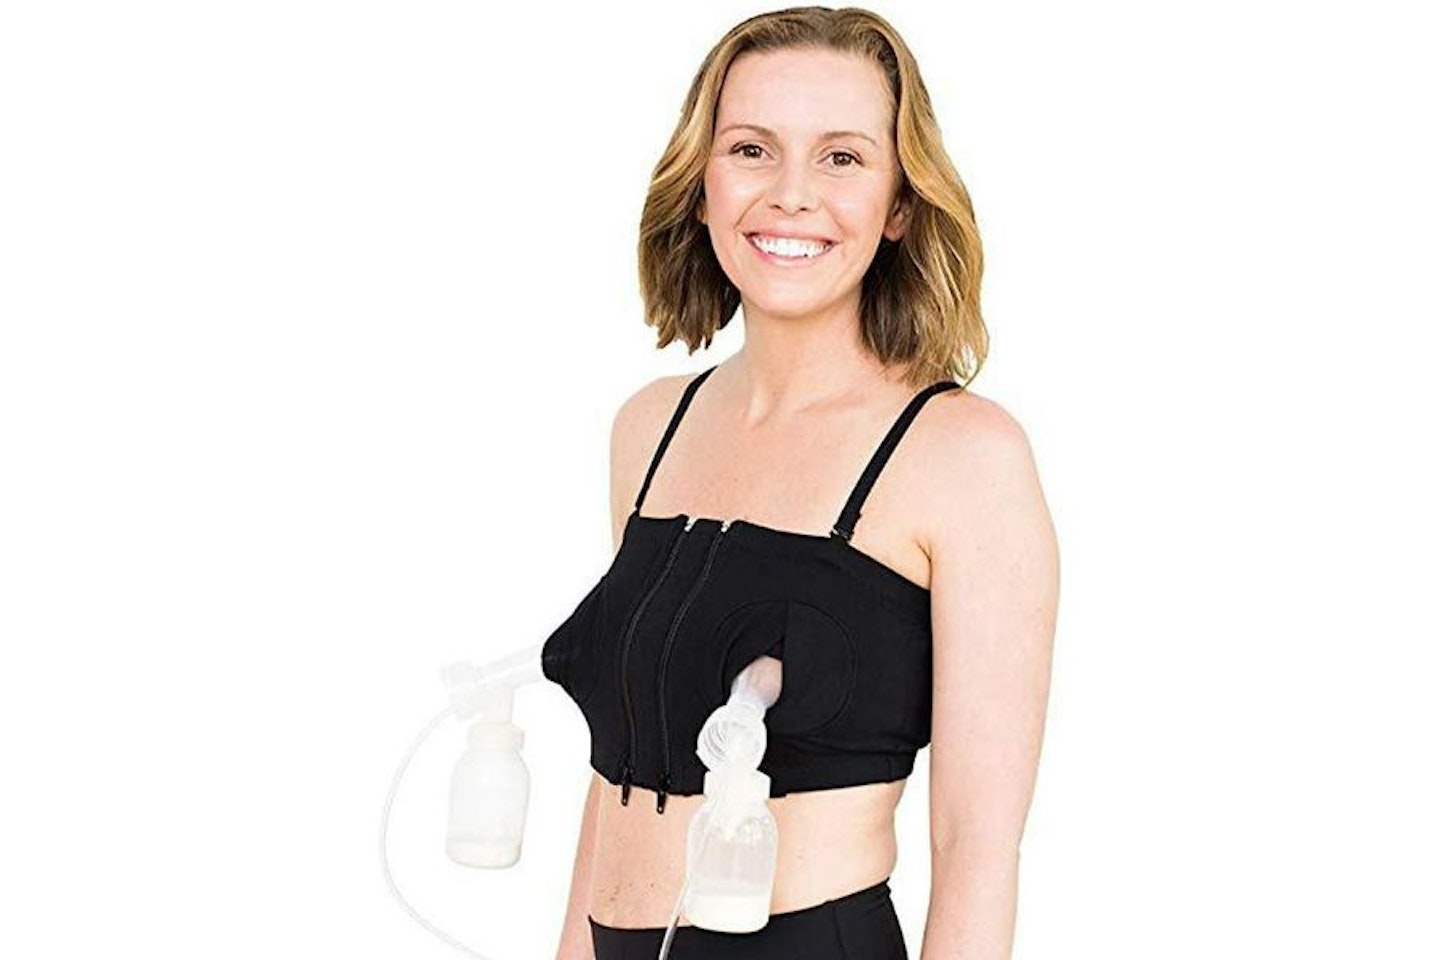 DIY A Nursing/Pumping Bra That Actually Fits AND Makes You Feel